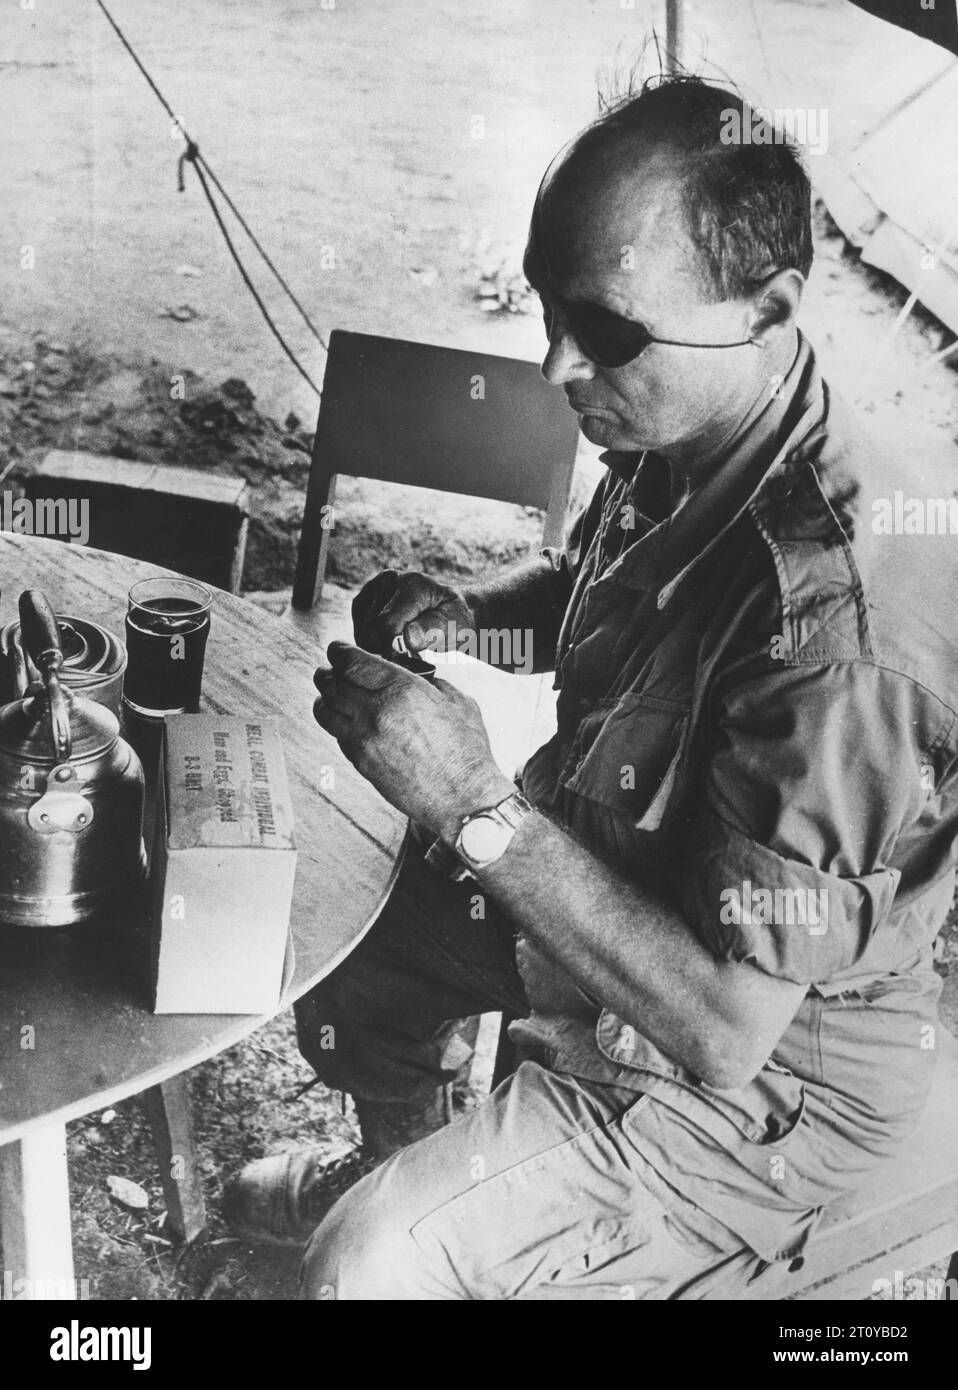 Jun 3, 1967 - Vietnam - General MOSHE DAYAN sits down to a snack while on patrol in Vietnam. Dayan was an Israeli military leader and politician. As commander of the Jerusalem front in Israel's War of Independence, Chief of staff of the Israel Defense Forces (1953-58) during the 1956 Suez Crisis and as Defense Minister during the Six-Day War, he became to the world a fighting symbol of the new state of Israel. After being blamed by some for the army's lack of preparation before the outbreak of the 1973 Yom Kippur War, he left the military and joined politics. (Credit Image: © Keystone Press Ag Stock Photo